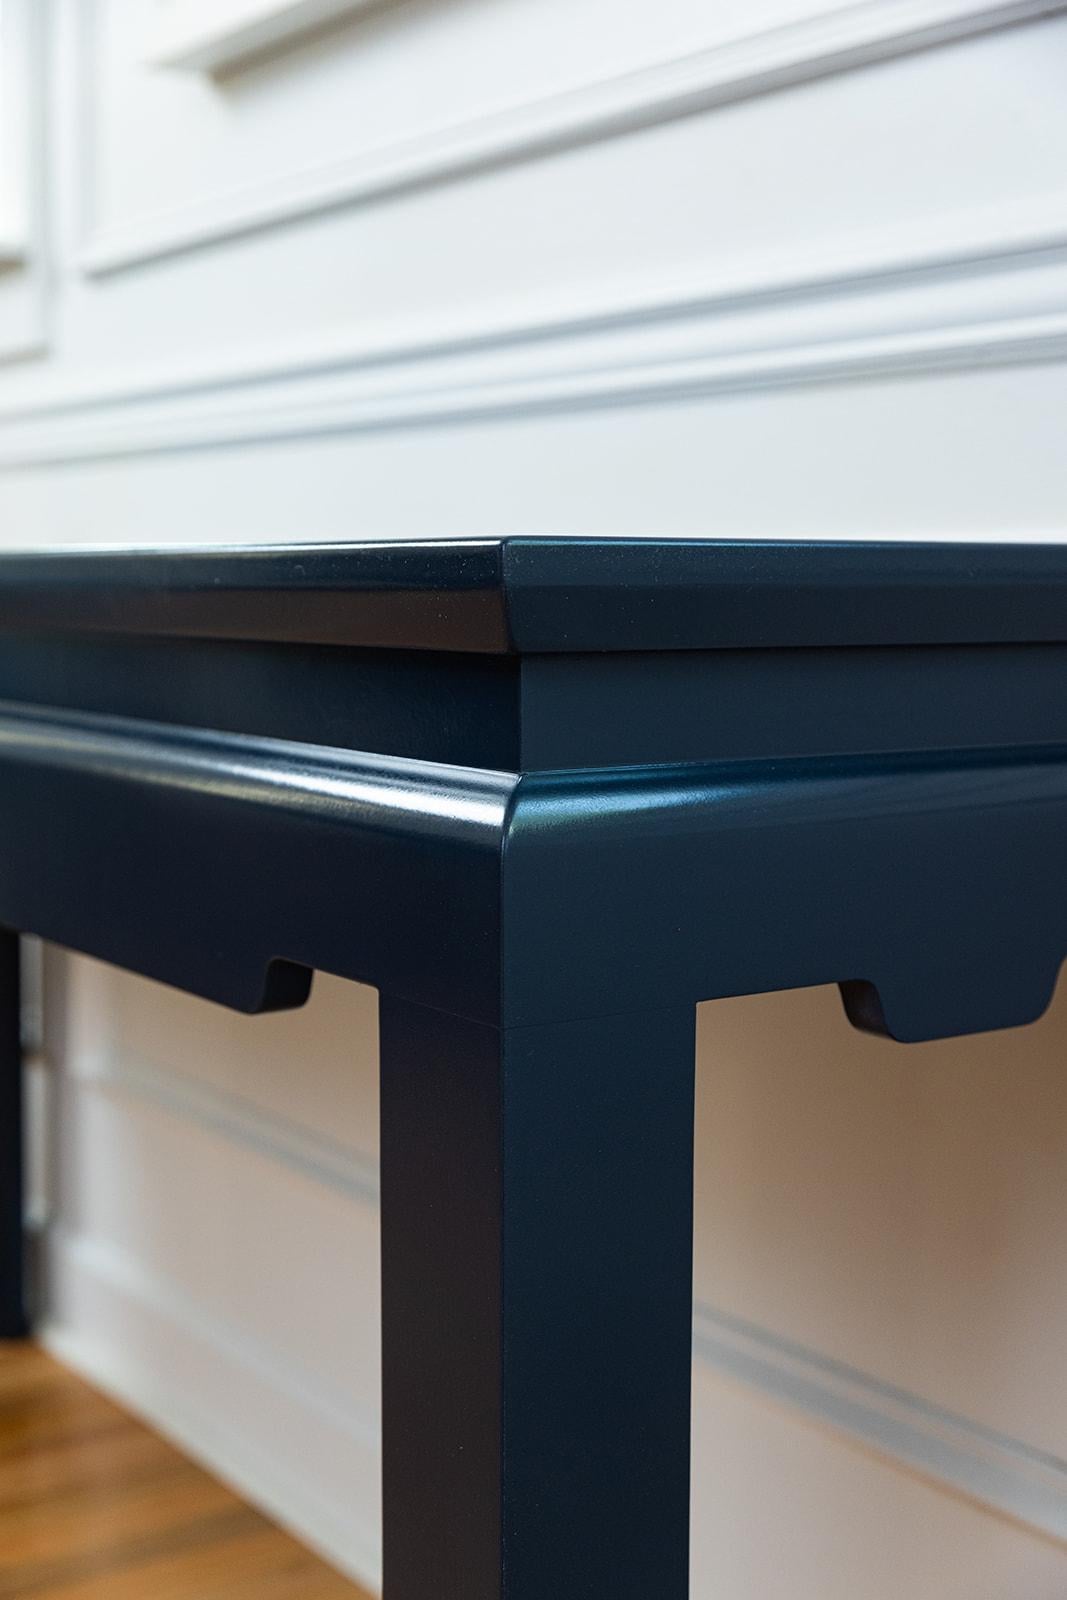 Bespoke Modern Ming Console Table Custom Built and Lacquered Hale Navy Gloss For Sale 1